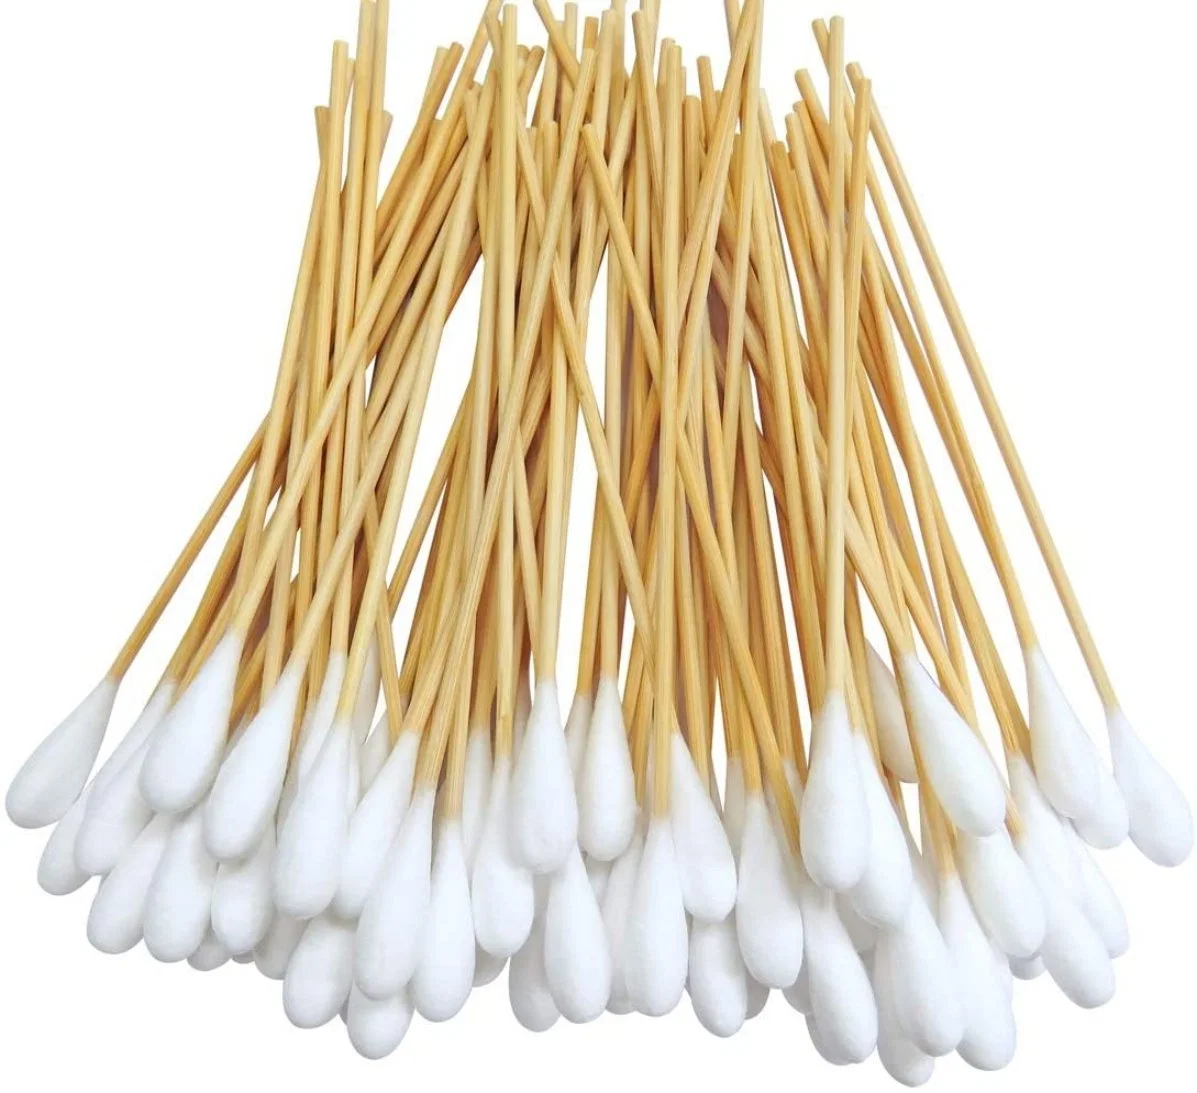 Cotton Tipped Applicator Sampling Swab Plastic Stick or Wooden Stick Single Head or Double Head Cotton Buds